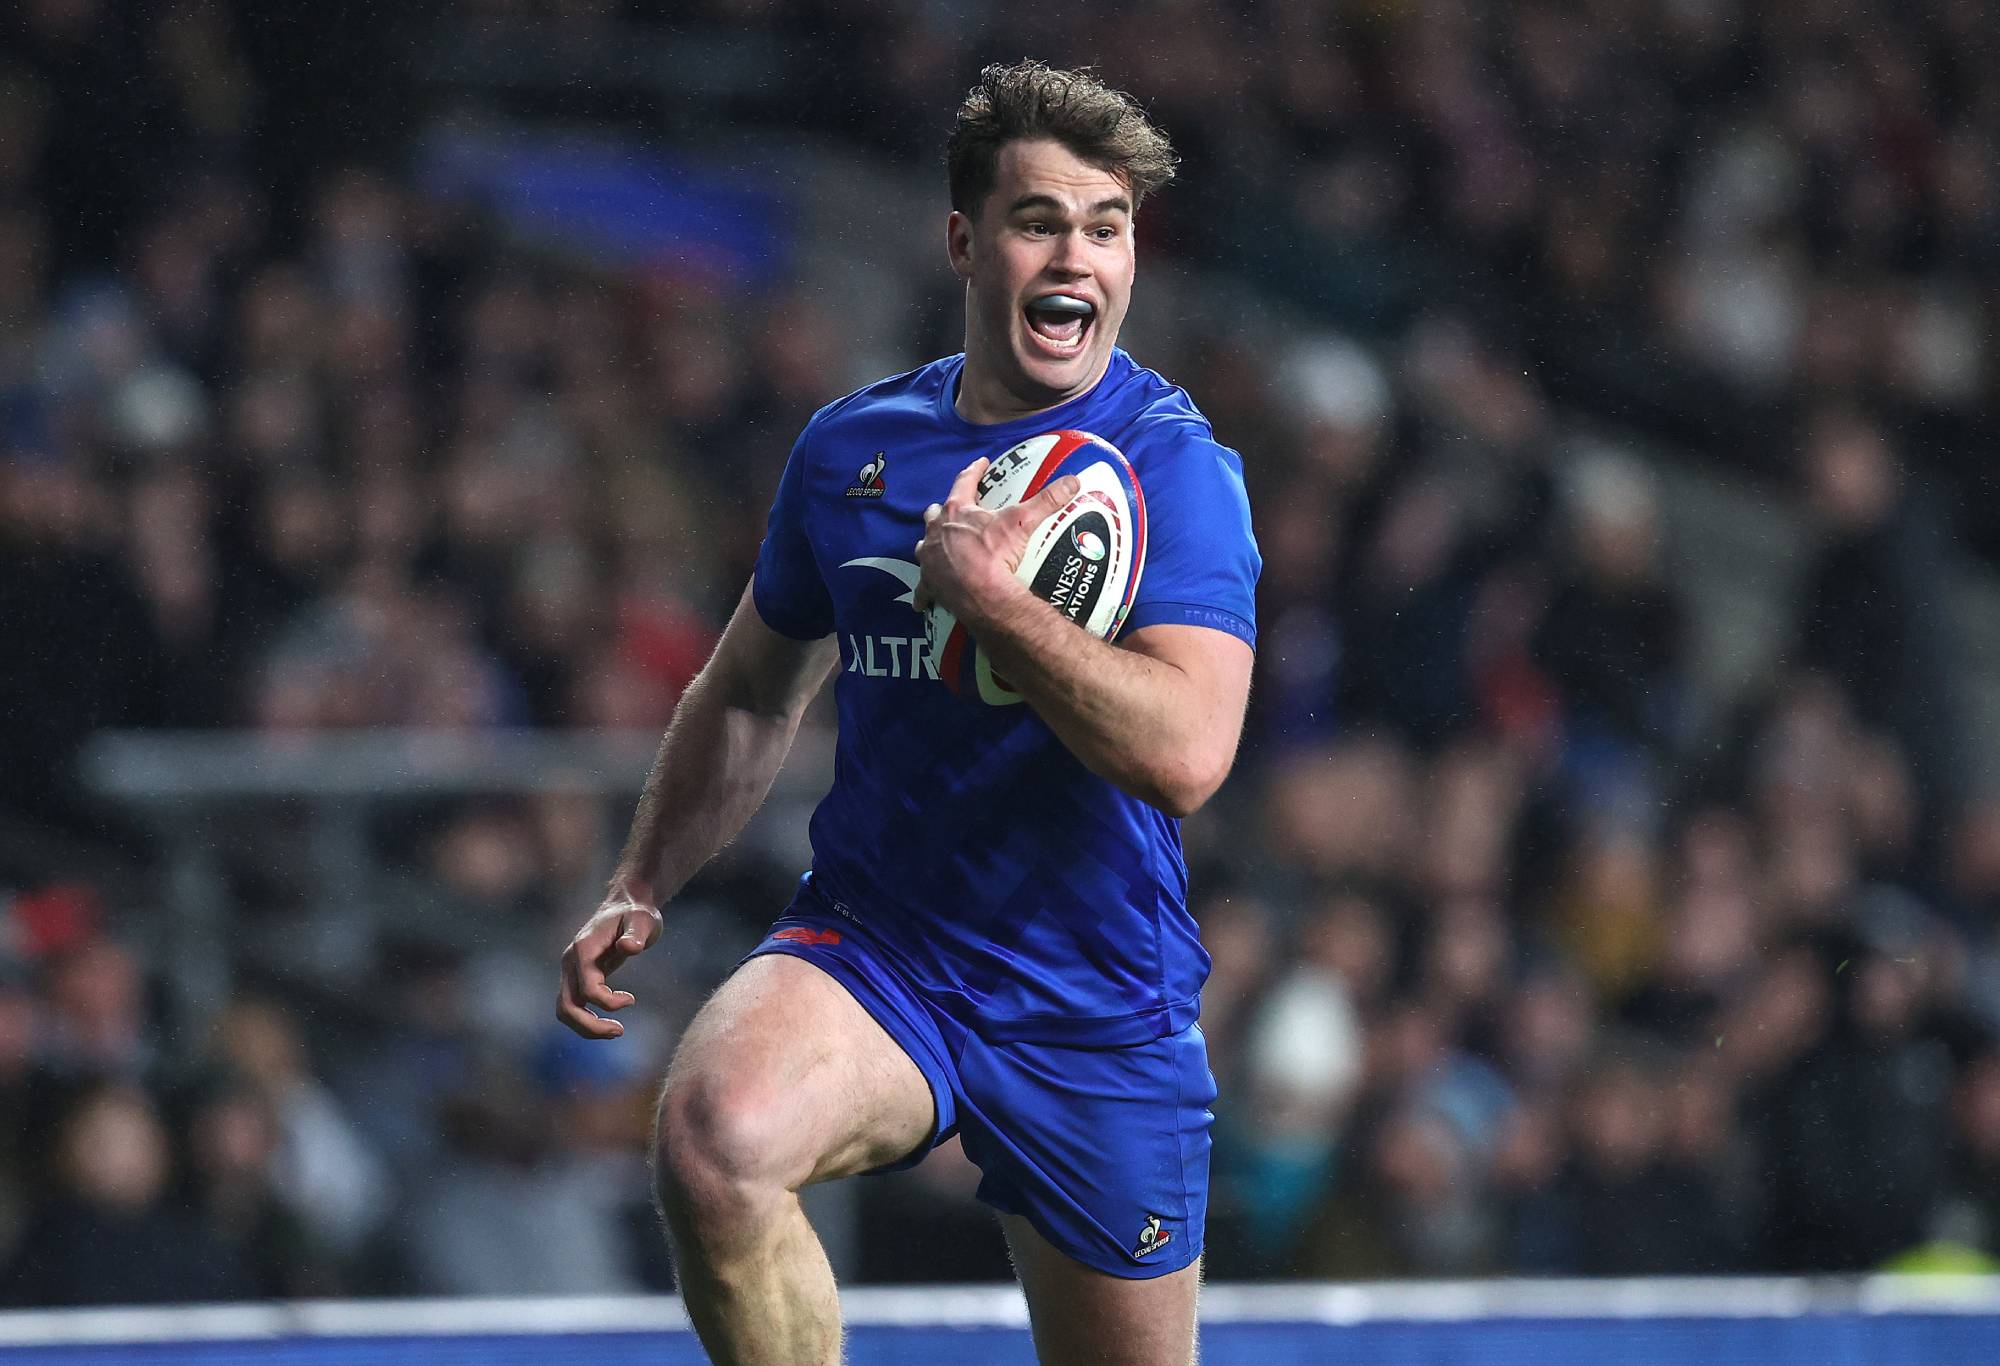 Damian Penaud of France celebrates early as he sees a clear path to scoring their 5th try during the Guinness Six Nations Rugby match between England and France at Twickenham Stadium on March 11, 2023 in London, United Kingdom. (Photo by Charlotte Wilson/Offside/Offside via Getty Images)